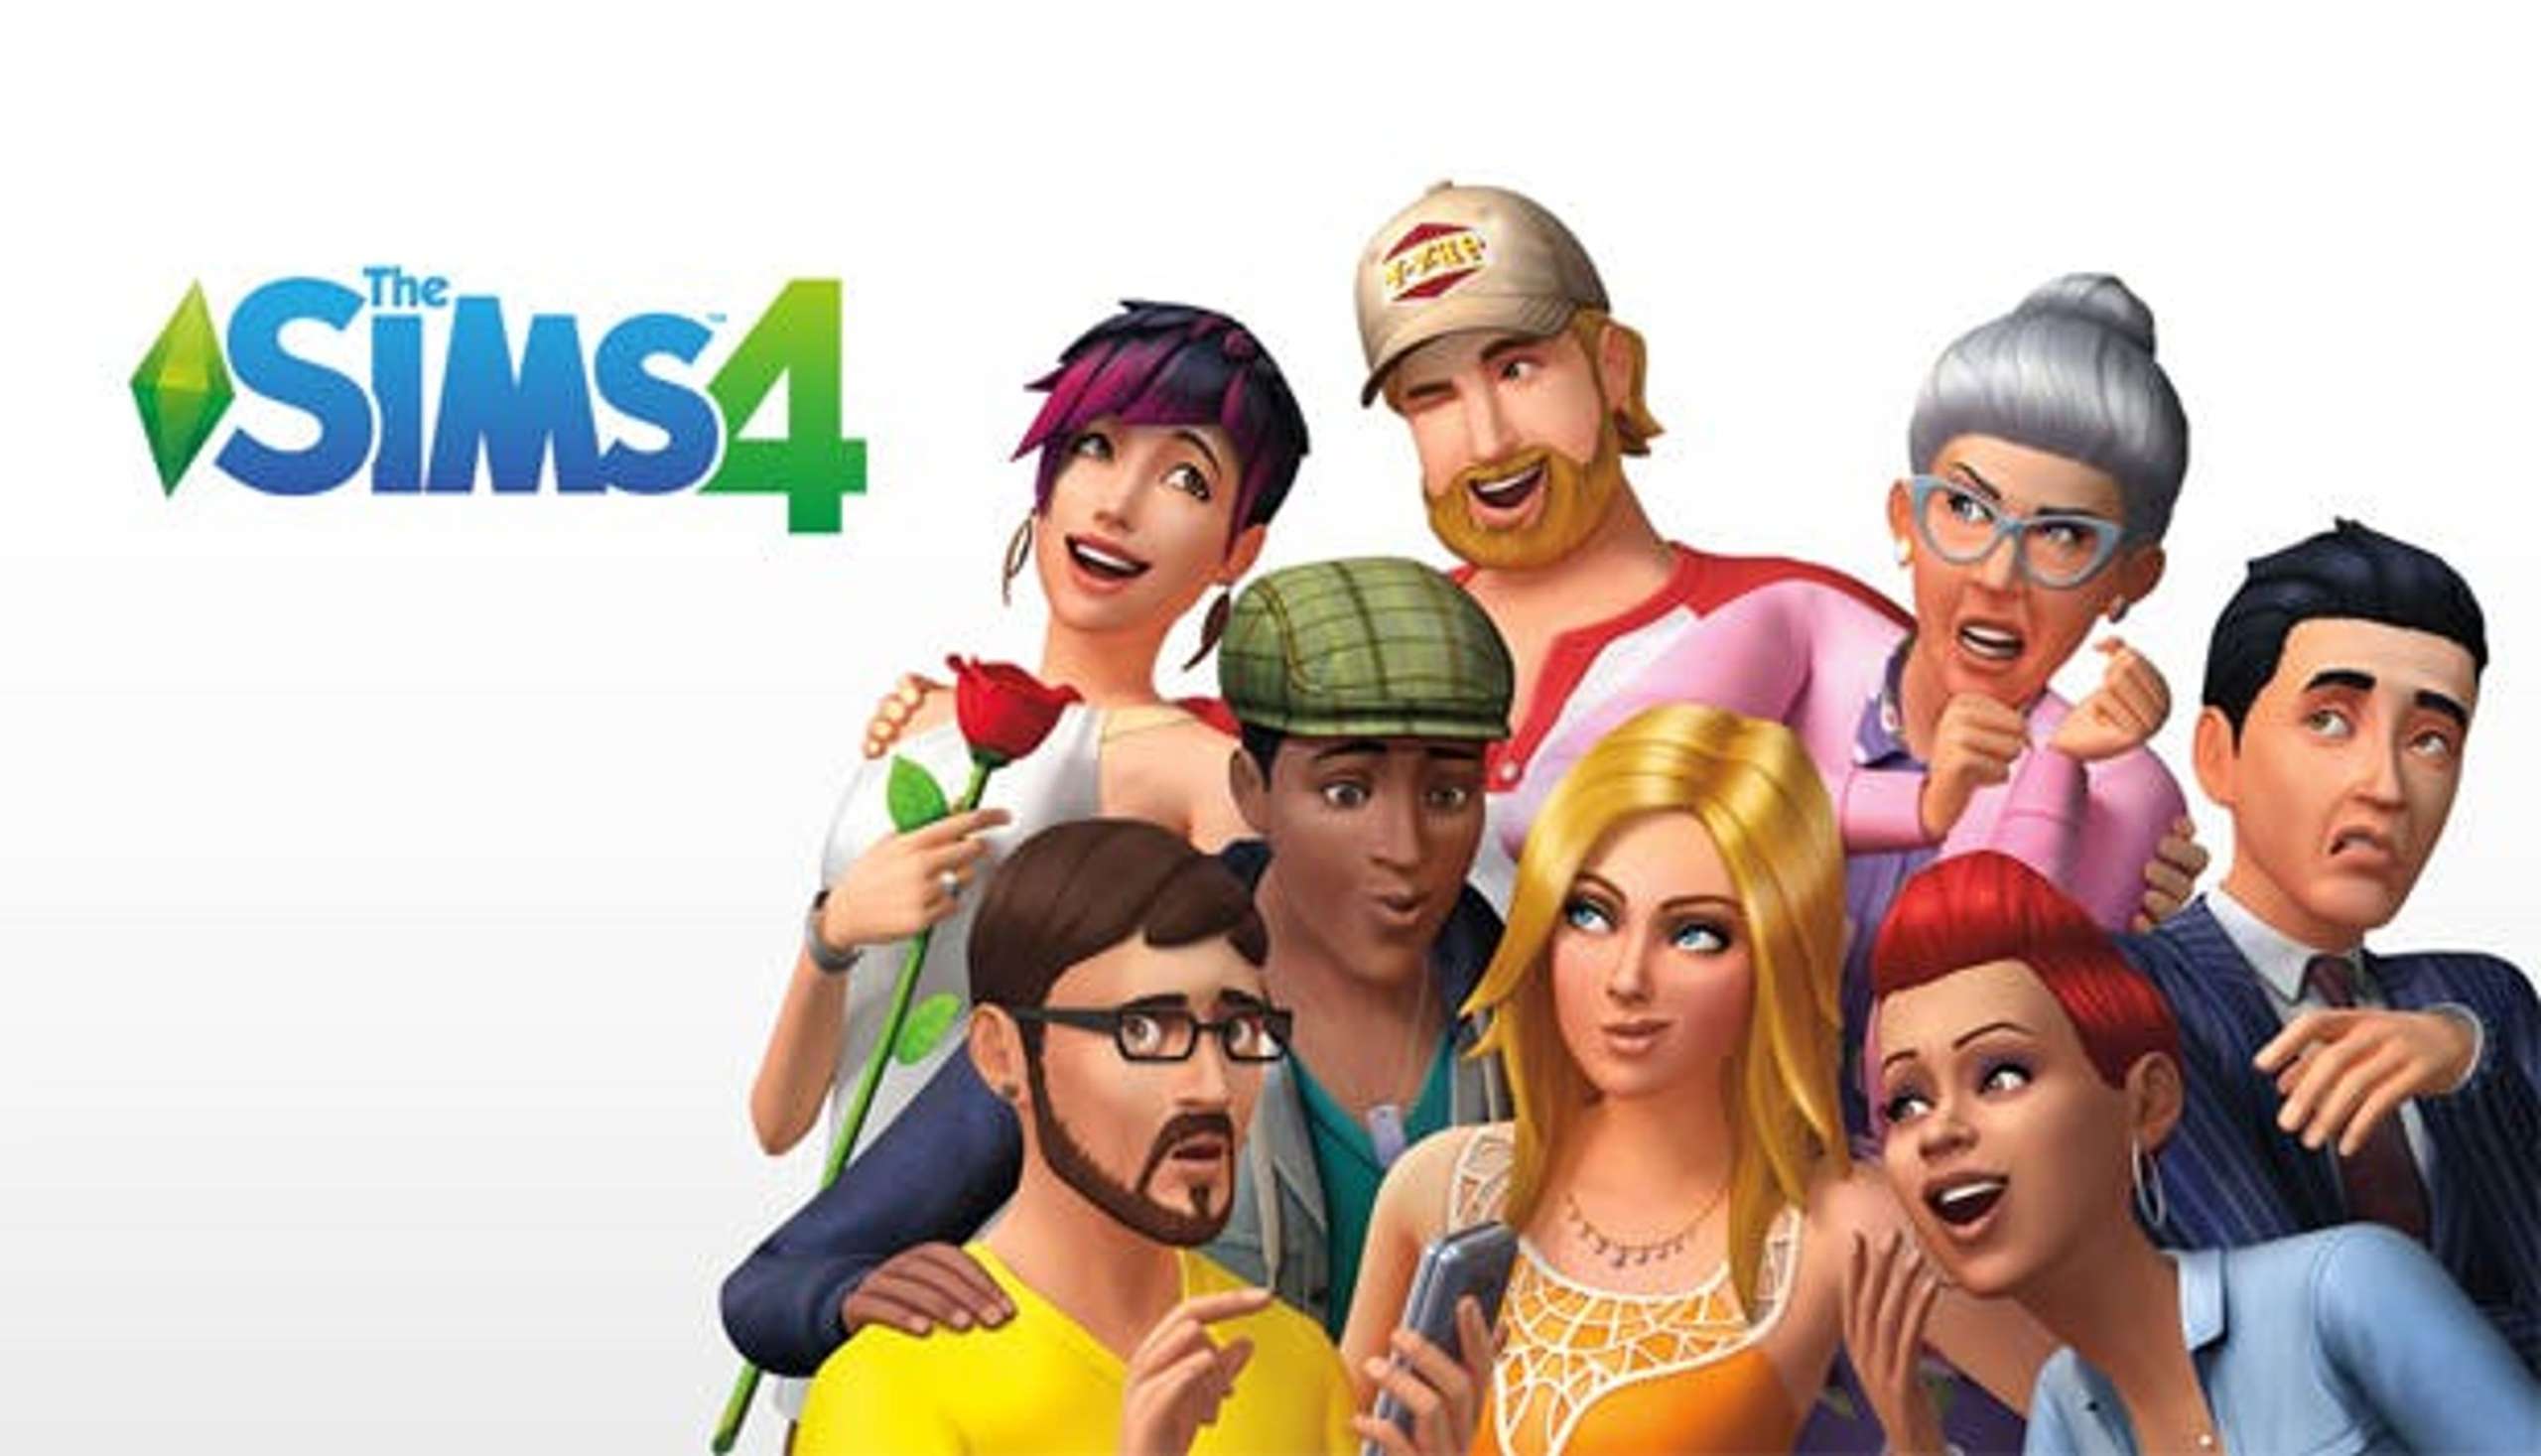 The Sims 4 Will Introduce The Ability For You To Choose Your Sims’ Sexual Preferences